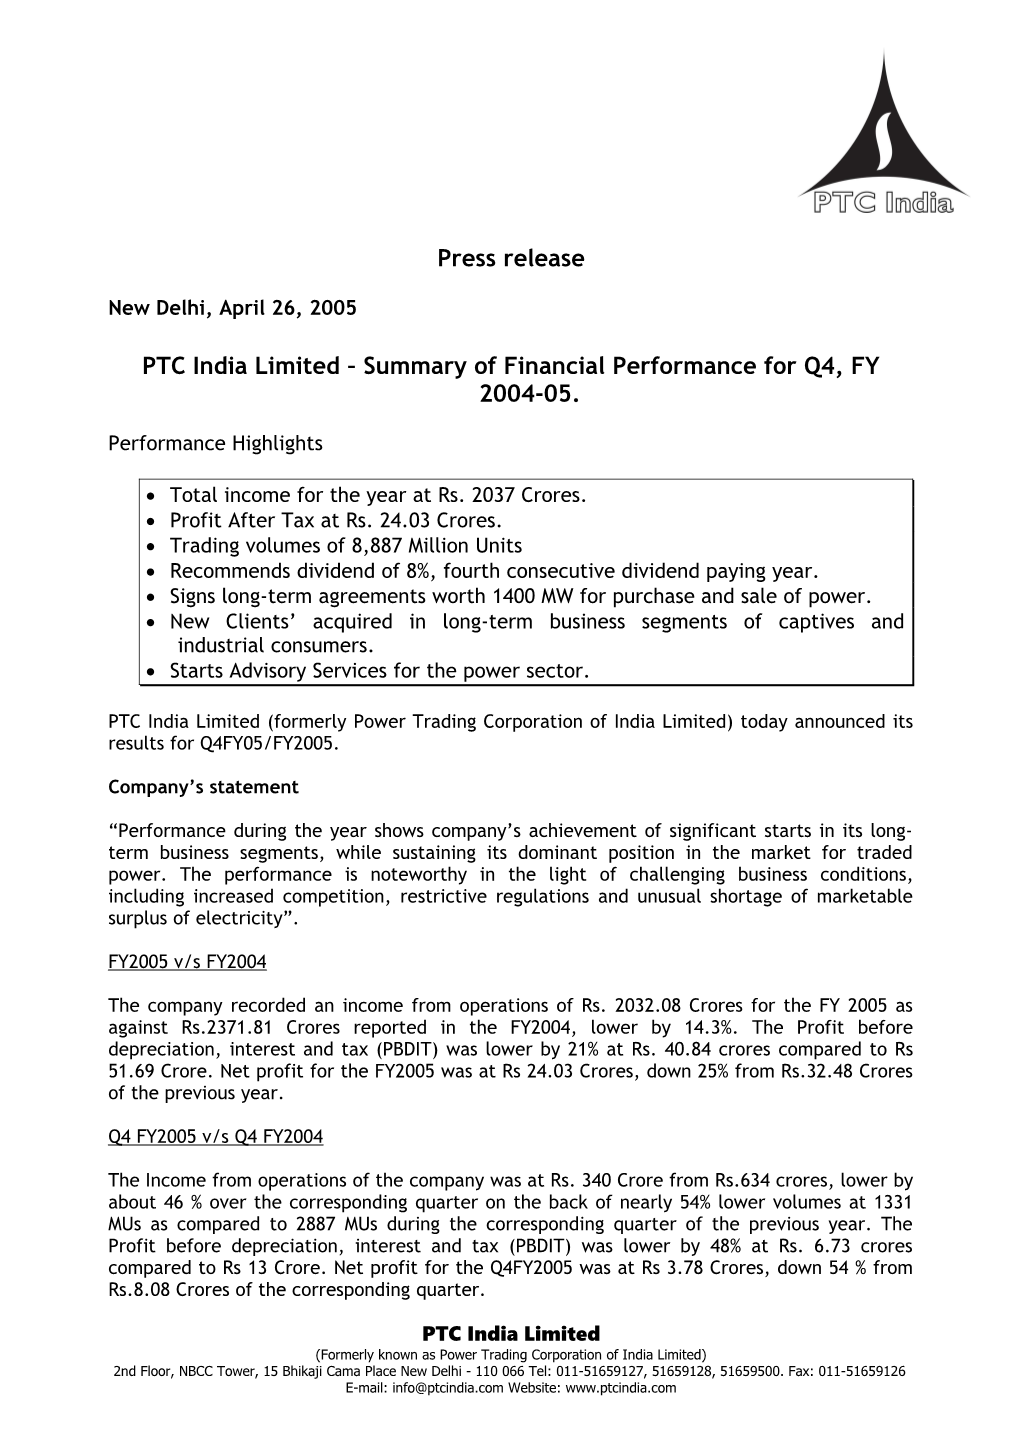 PTC India Limited Summary of Financial Performance for Q4, FY 2004-05